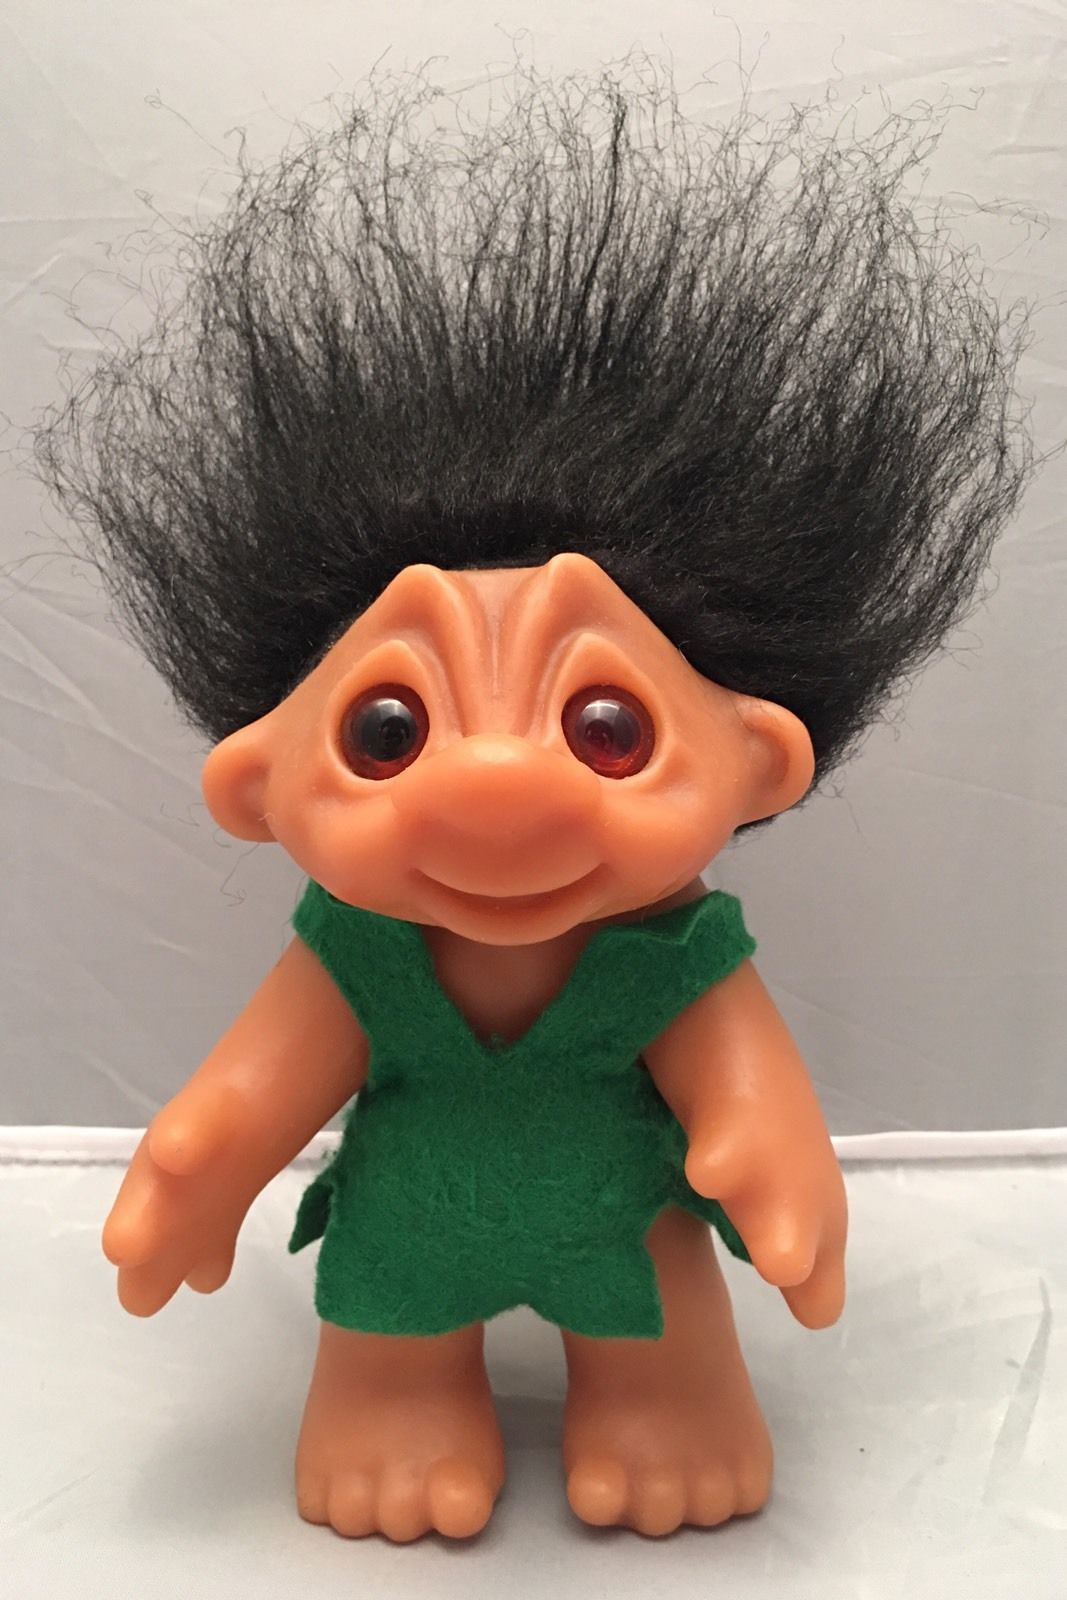 How Trolls Became One Of The Most Popular Toy Brands Ever